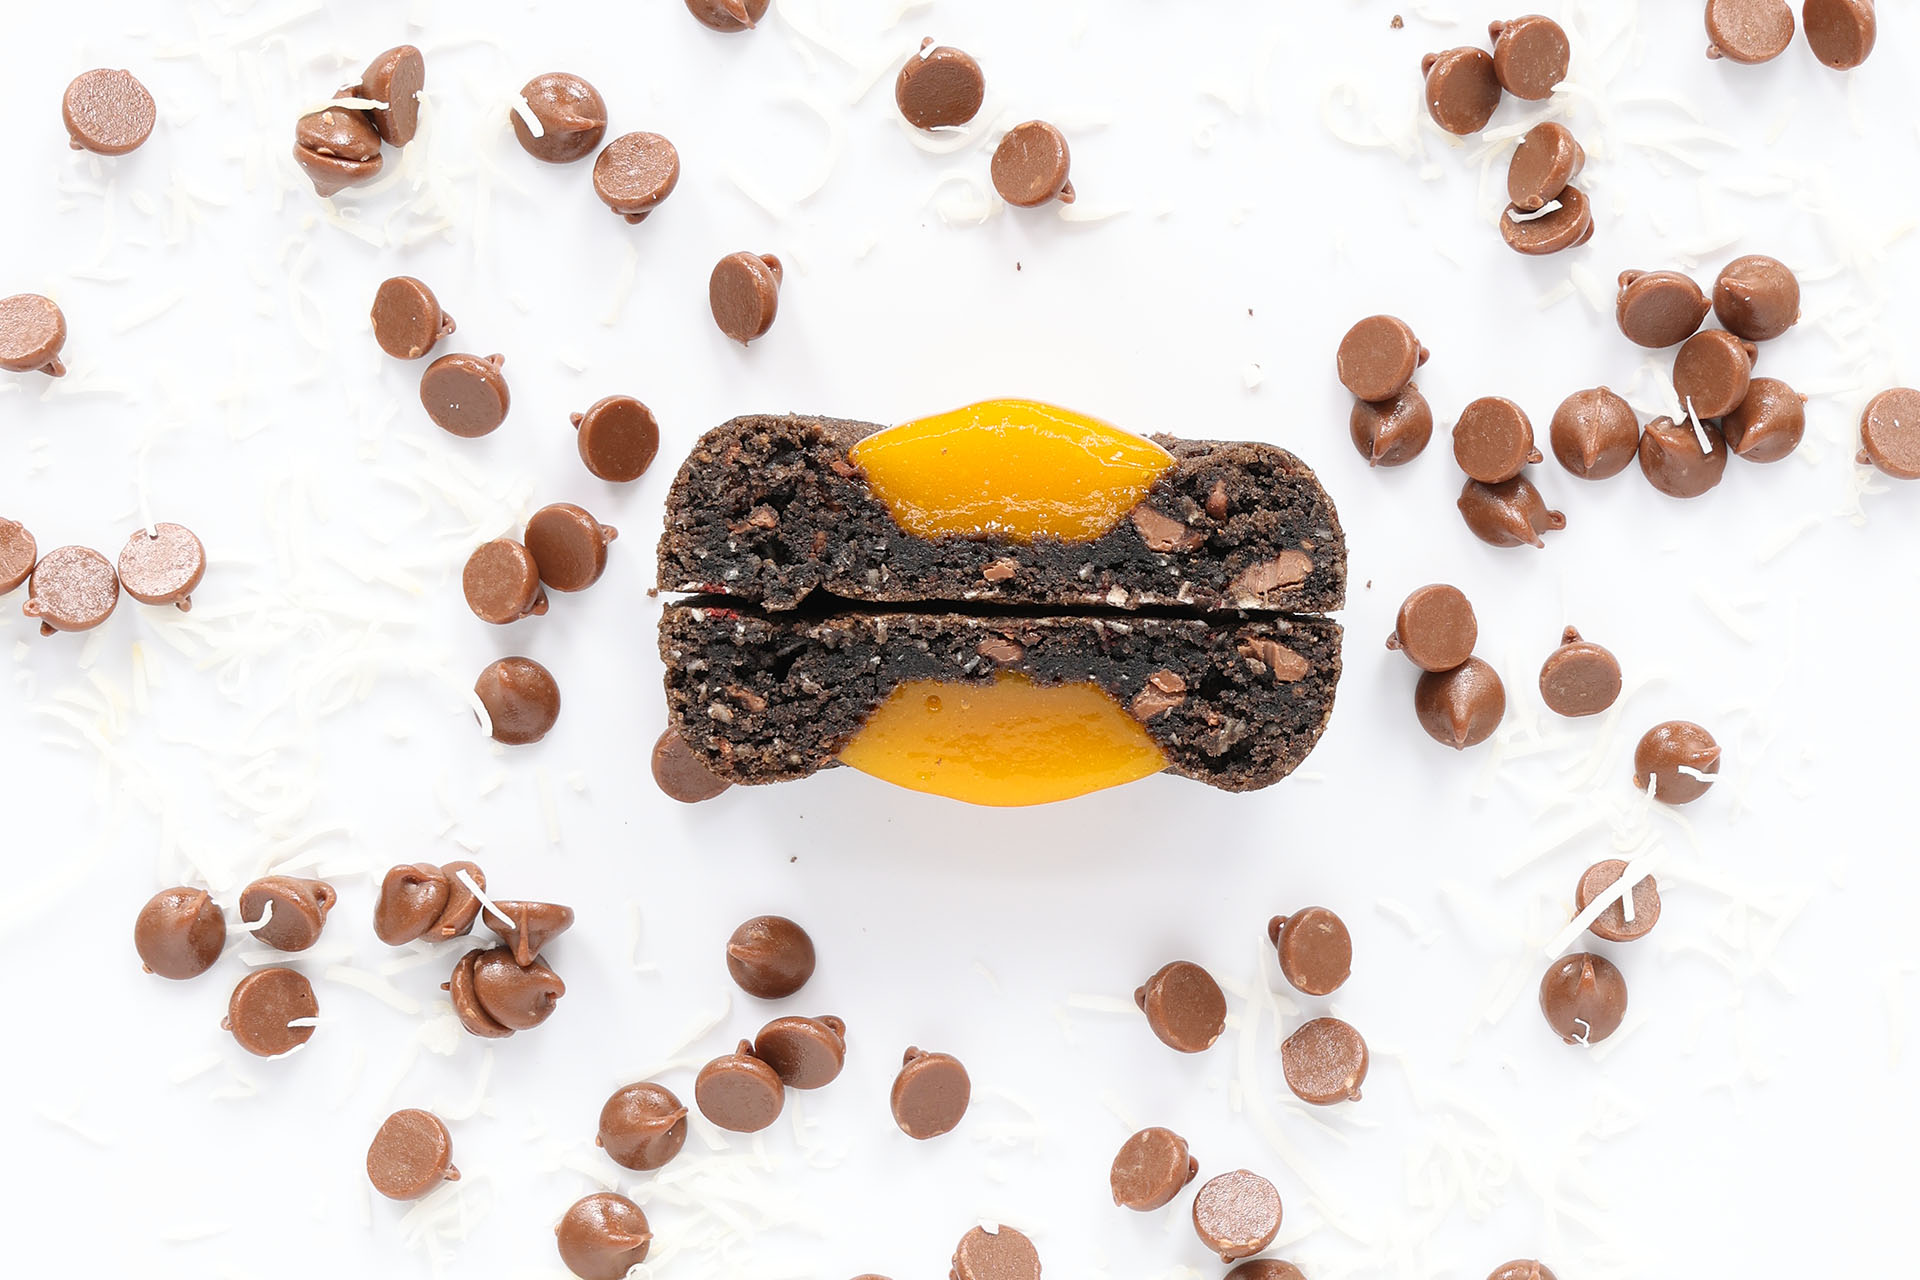 Chocolate cookie filled with apricot jam, surrounded by chocolate chips, espresso flakes, and coconut flakes on a white surface.